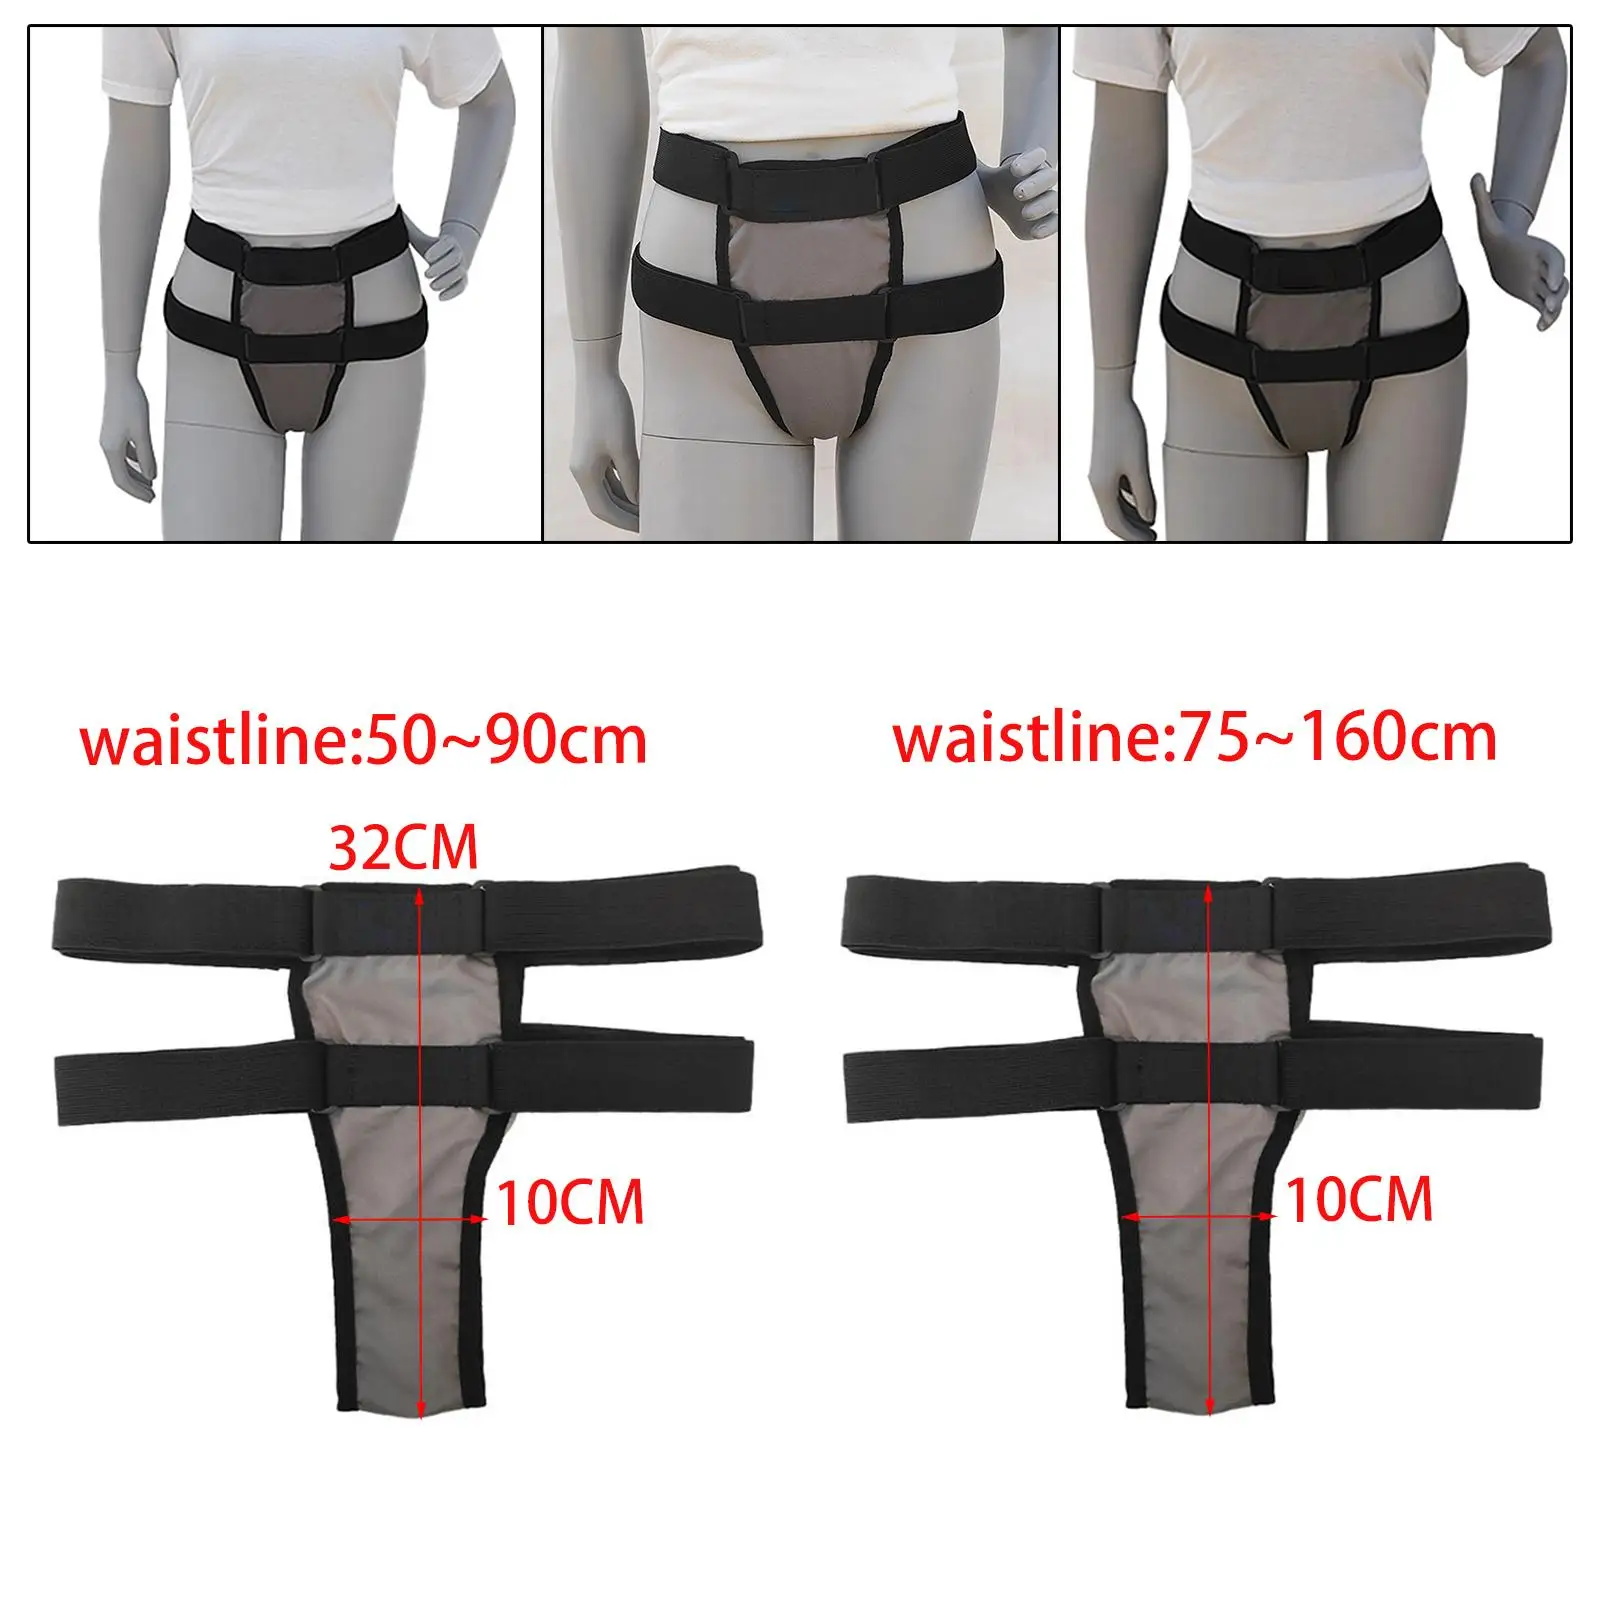 Pelvic Support Belt High Elasticity Recovery Black Uterus Support Girdle for Treating Postpartum Care Dysfunction Dropped Women